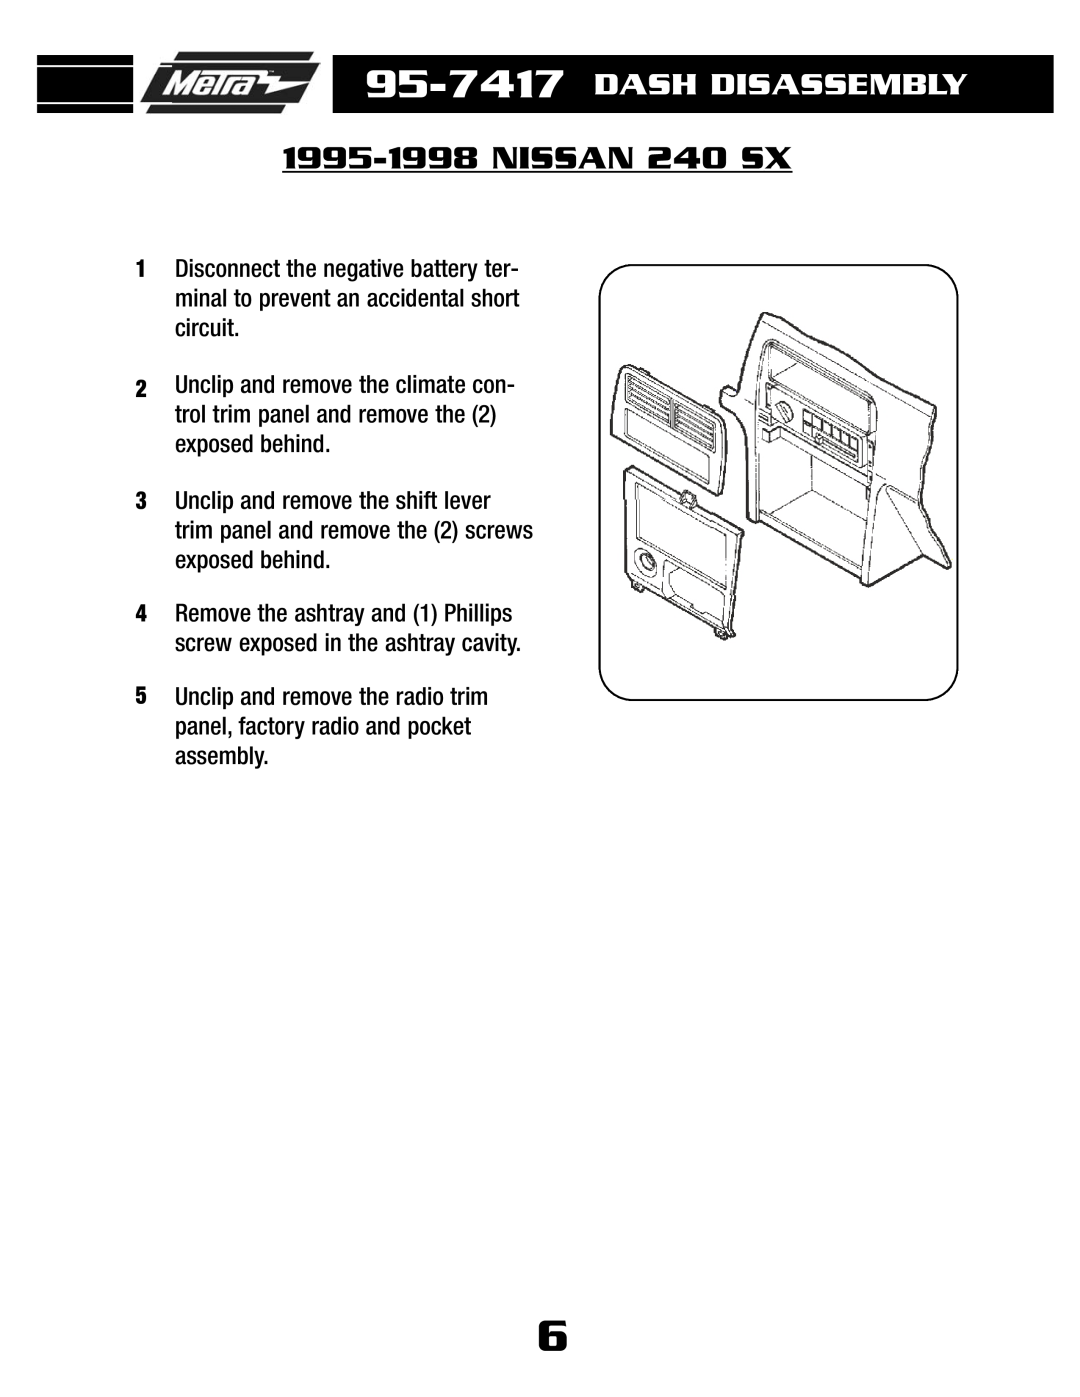 Metra Electronics 95-7417 installation instructions 1995-1998NISSAN 240 SX, Dash Disassembly 